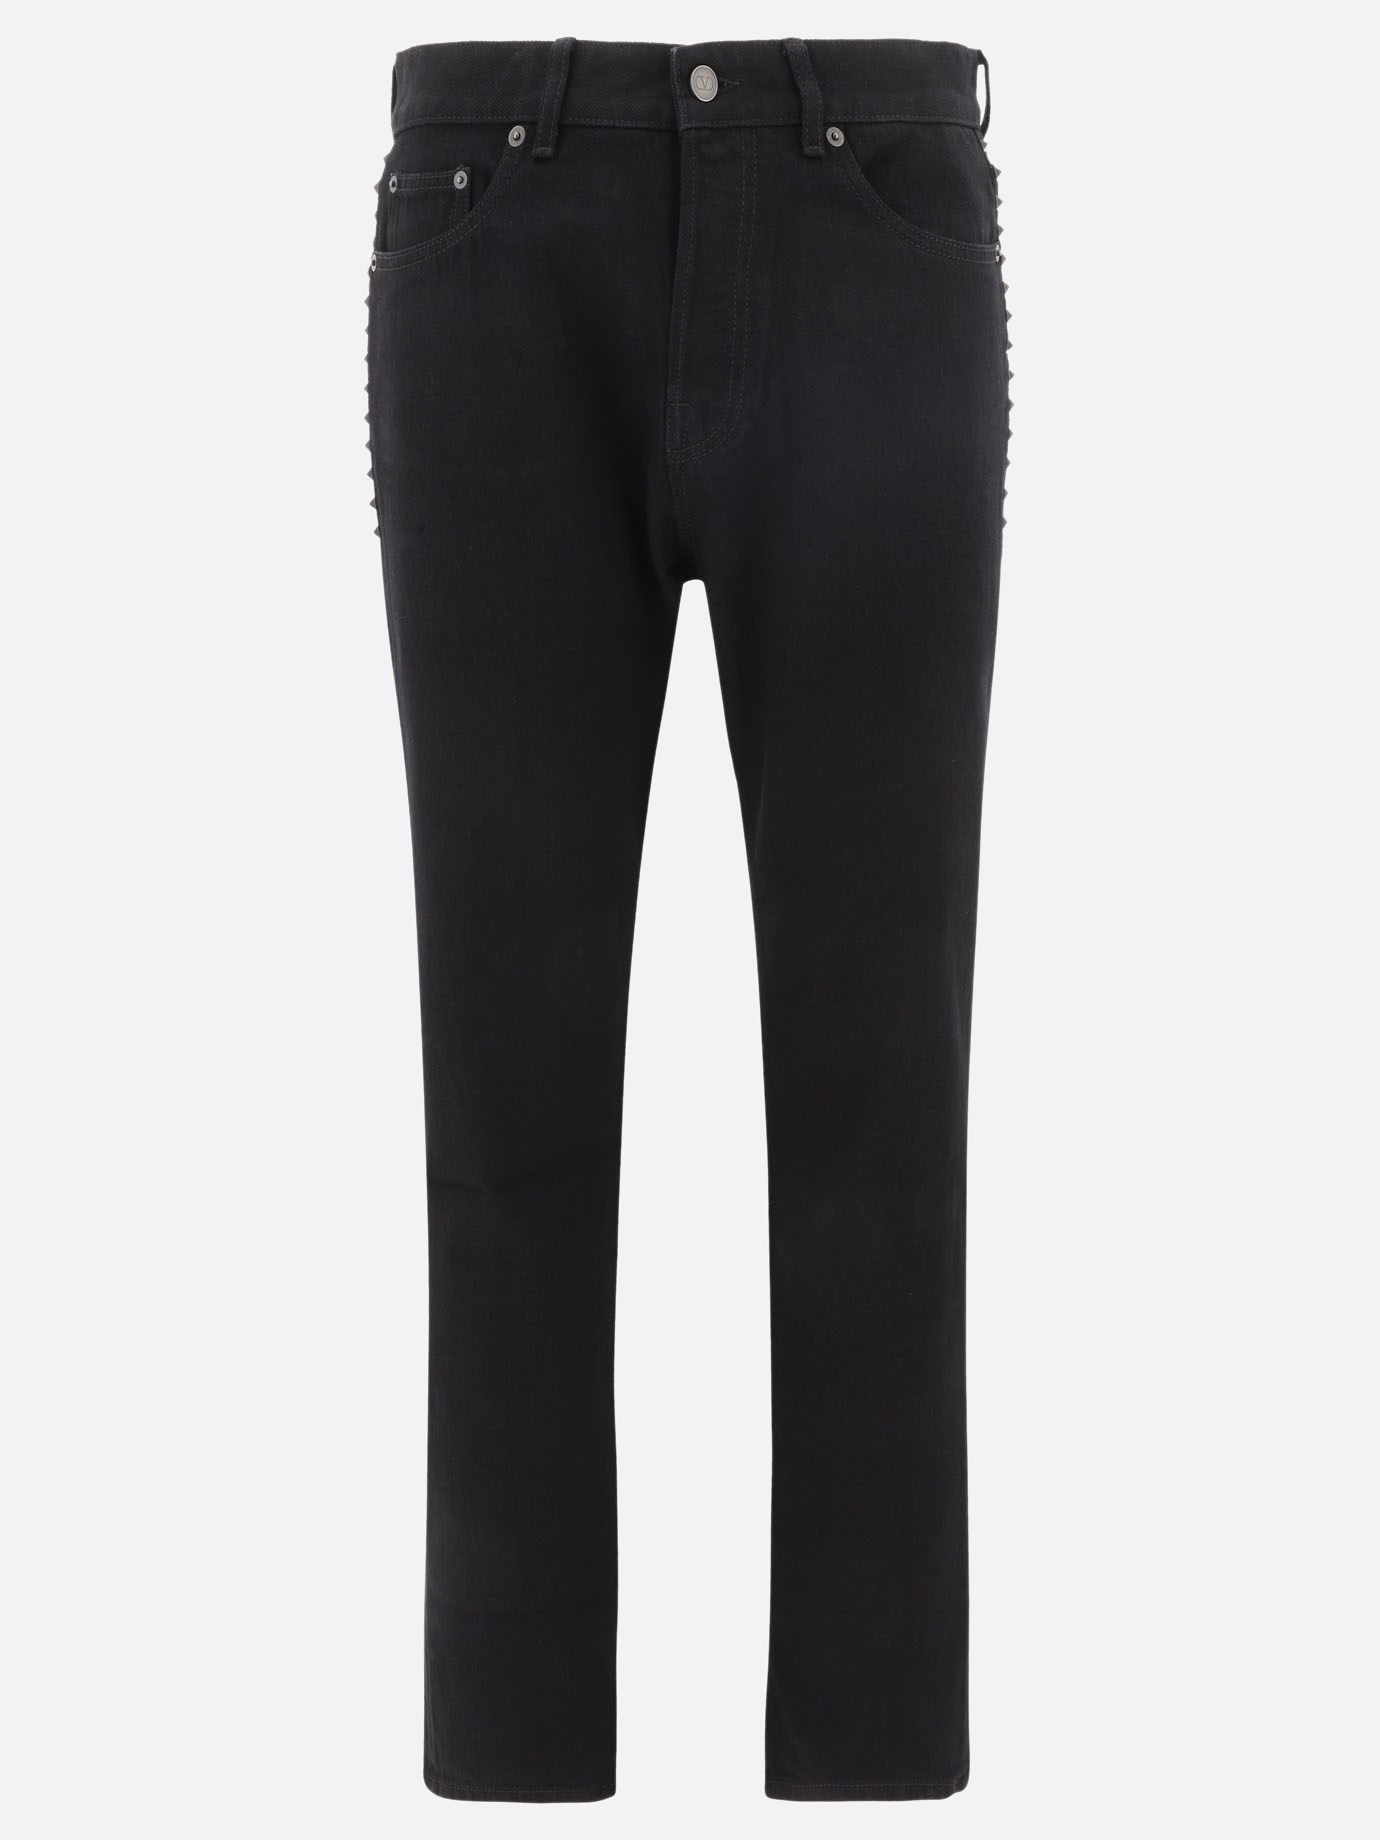 Jeans  Black Untitled by Valentino - 2